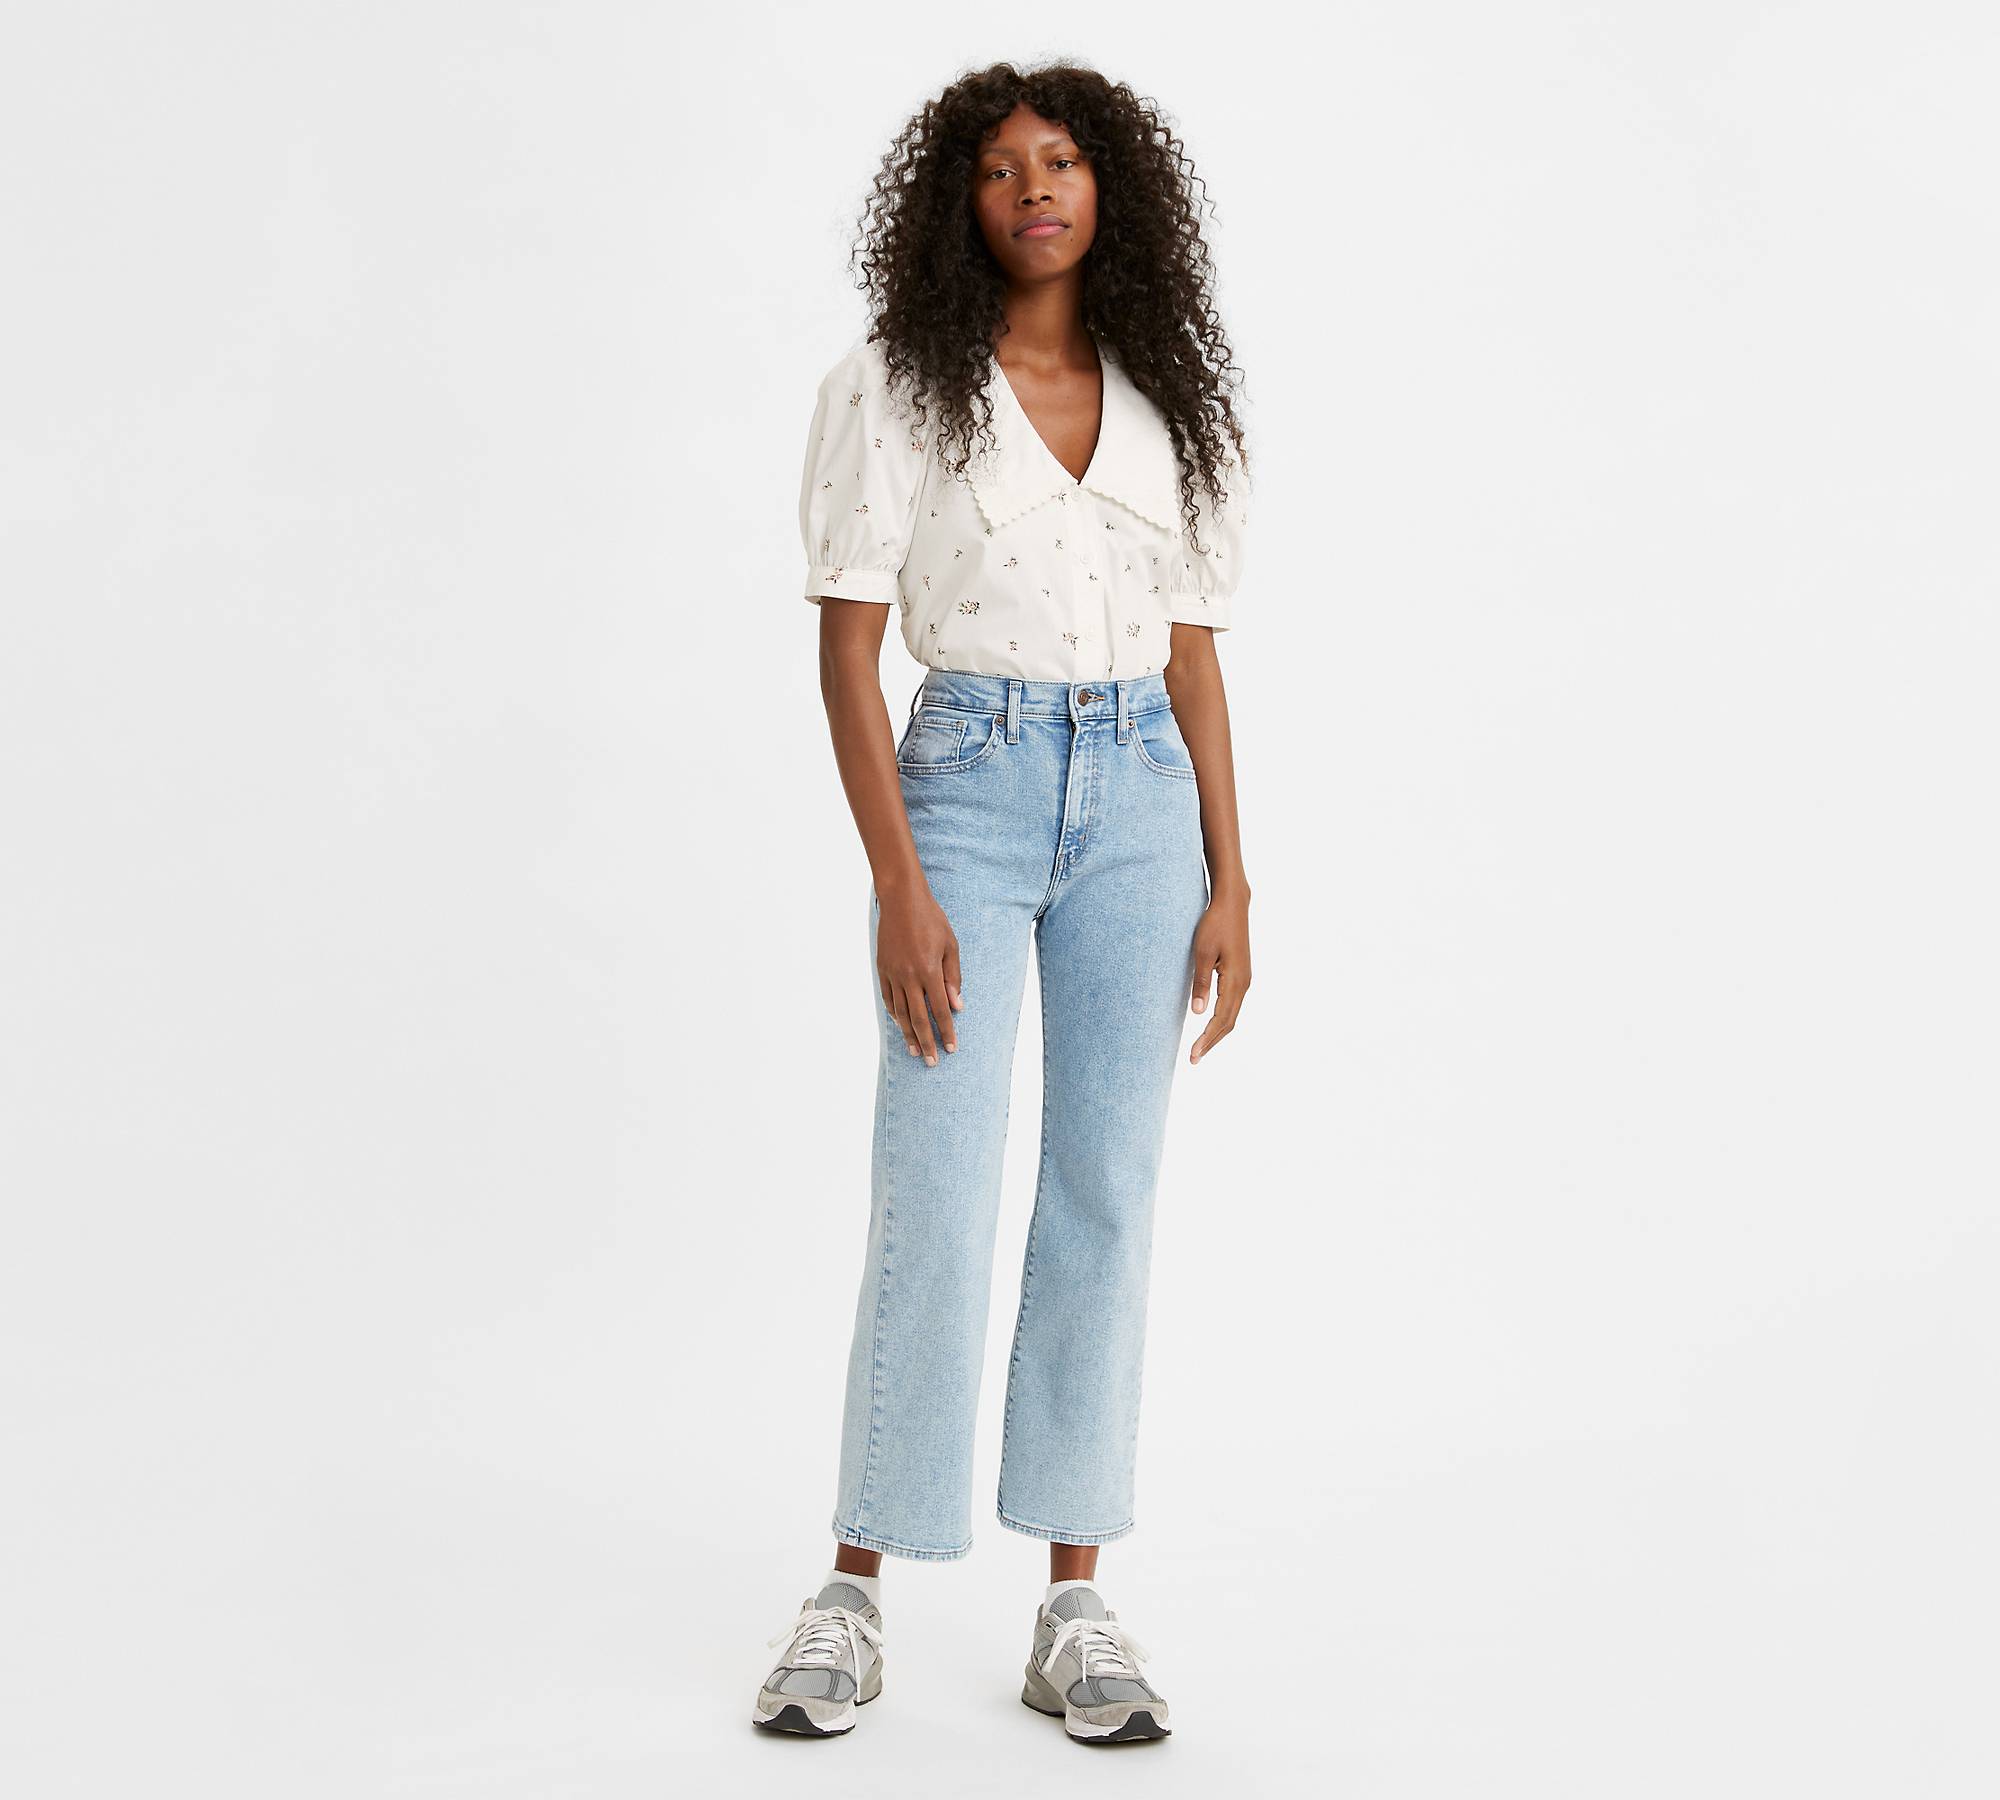 High Rise Cropped Flare Women's Jeans - Light Wash